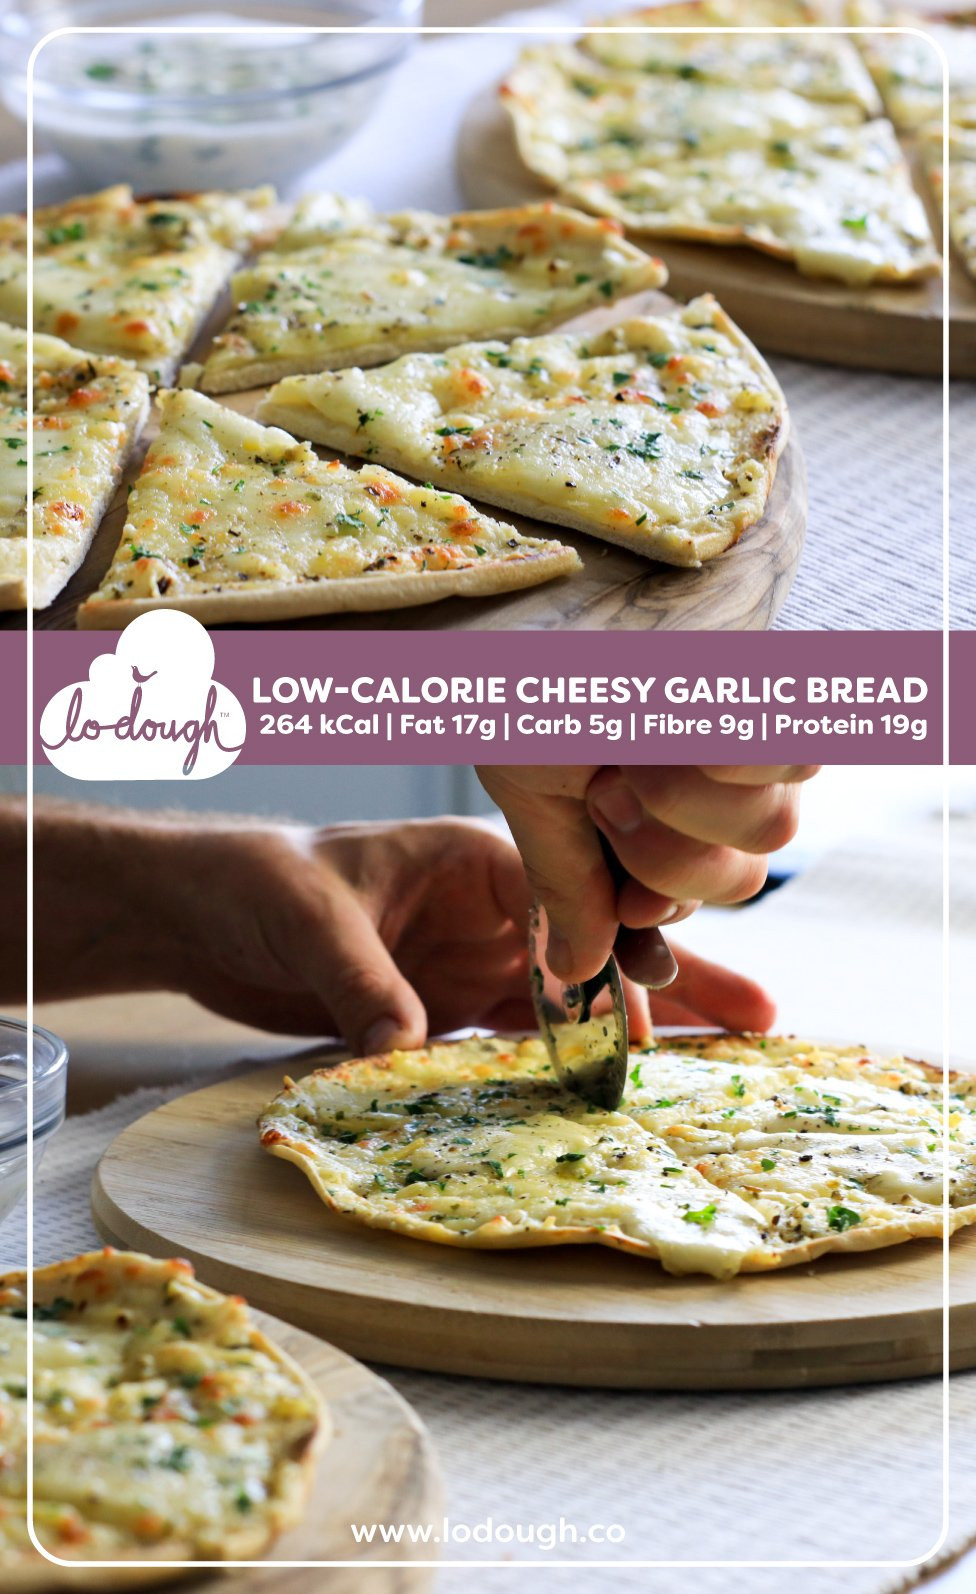 Low Calorie Garlic Bread
 Low calorie and low carb Cheesy Garlic Bread